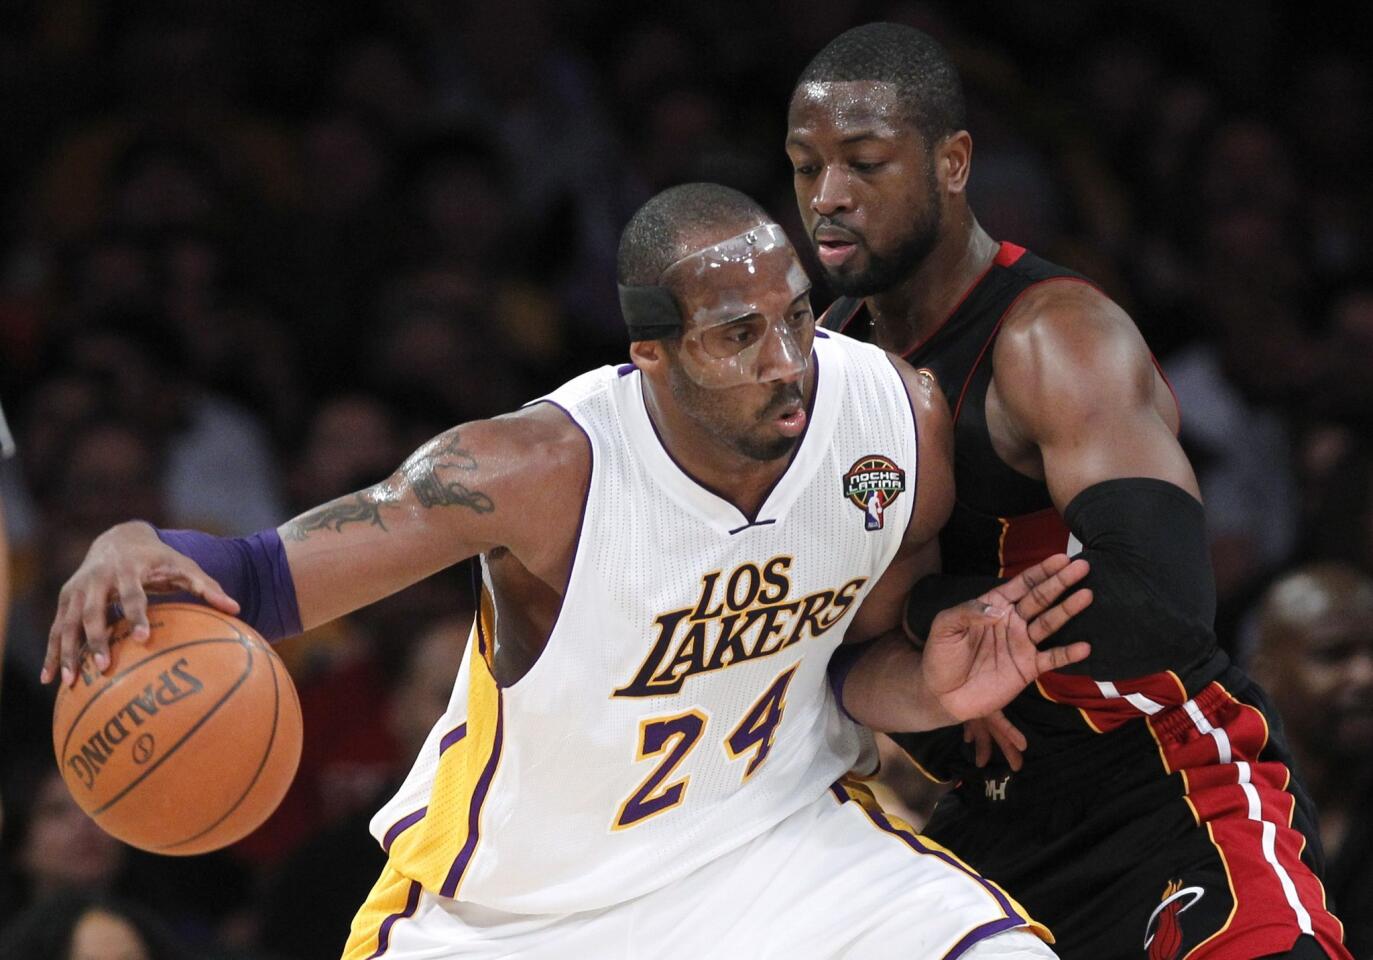 Los Angeles Lakers' Bryant drives on Miami Heat's Wade during the first half of their NBA basketball game in Los Angeles